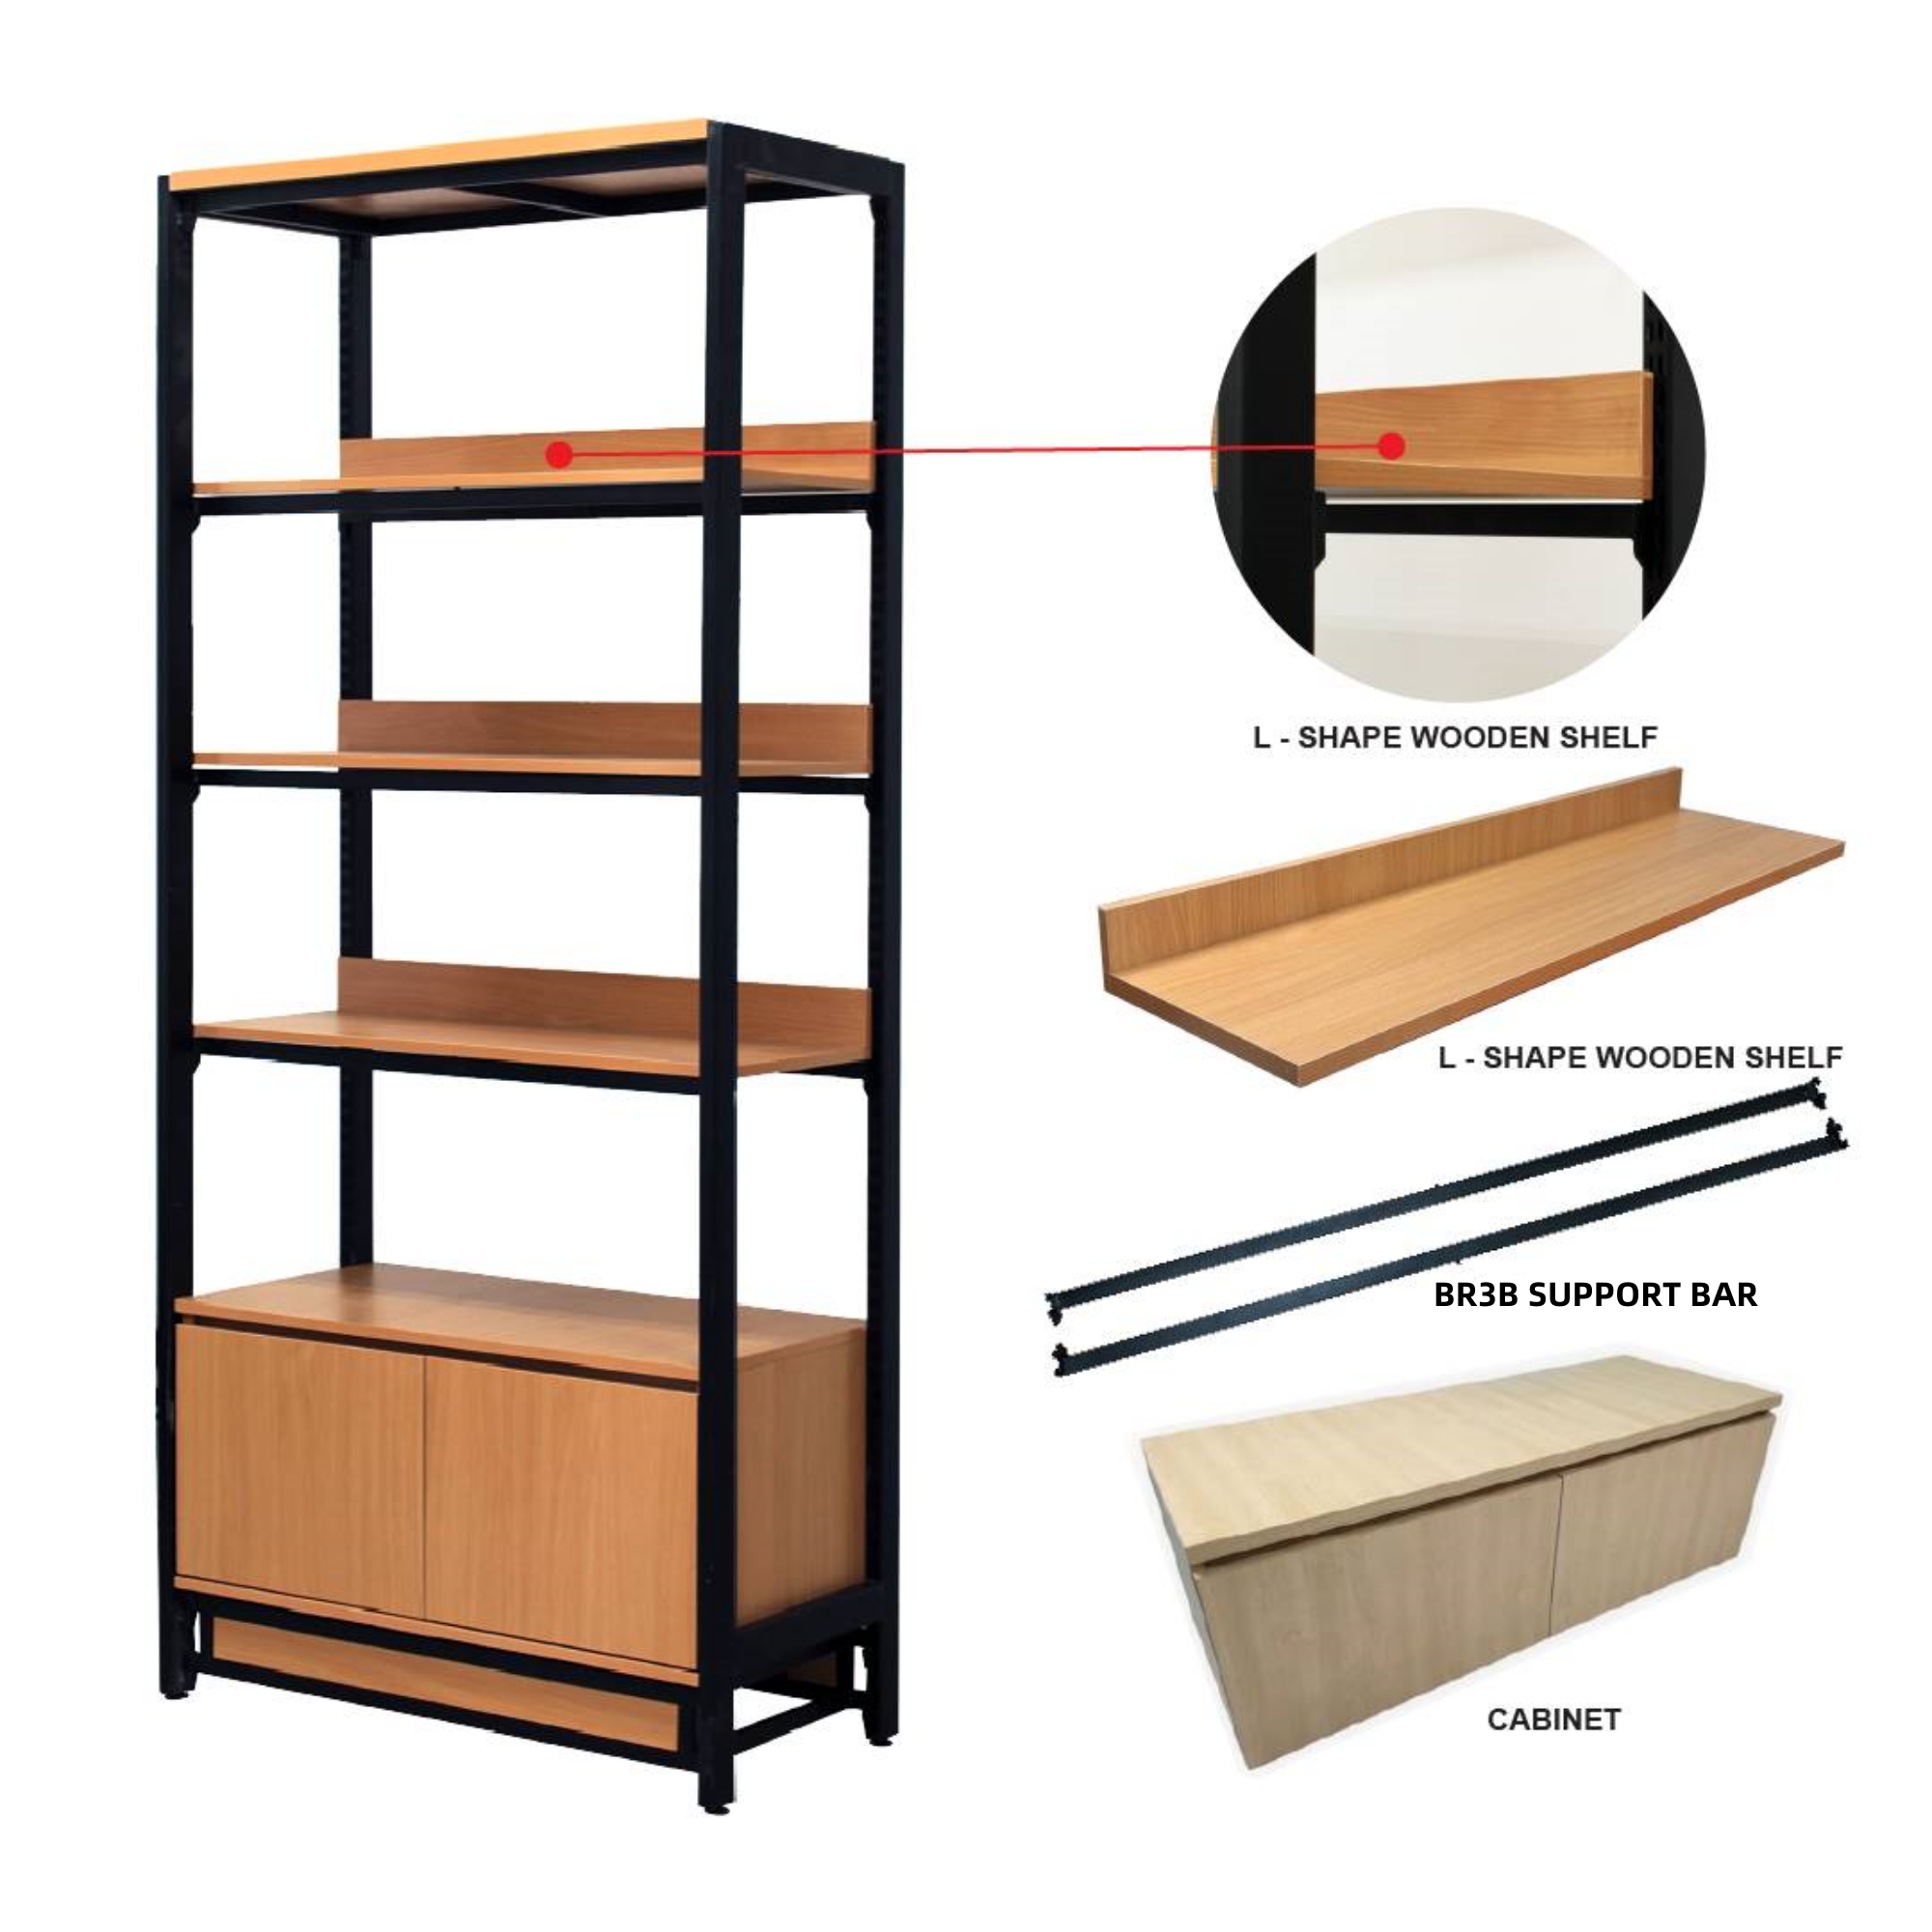 H-TYPE 4 LAYER 3PCS L SHELVING WITH DETAIL